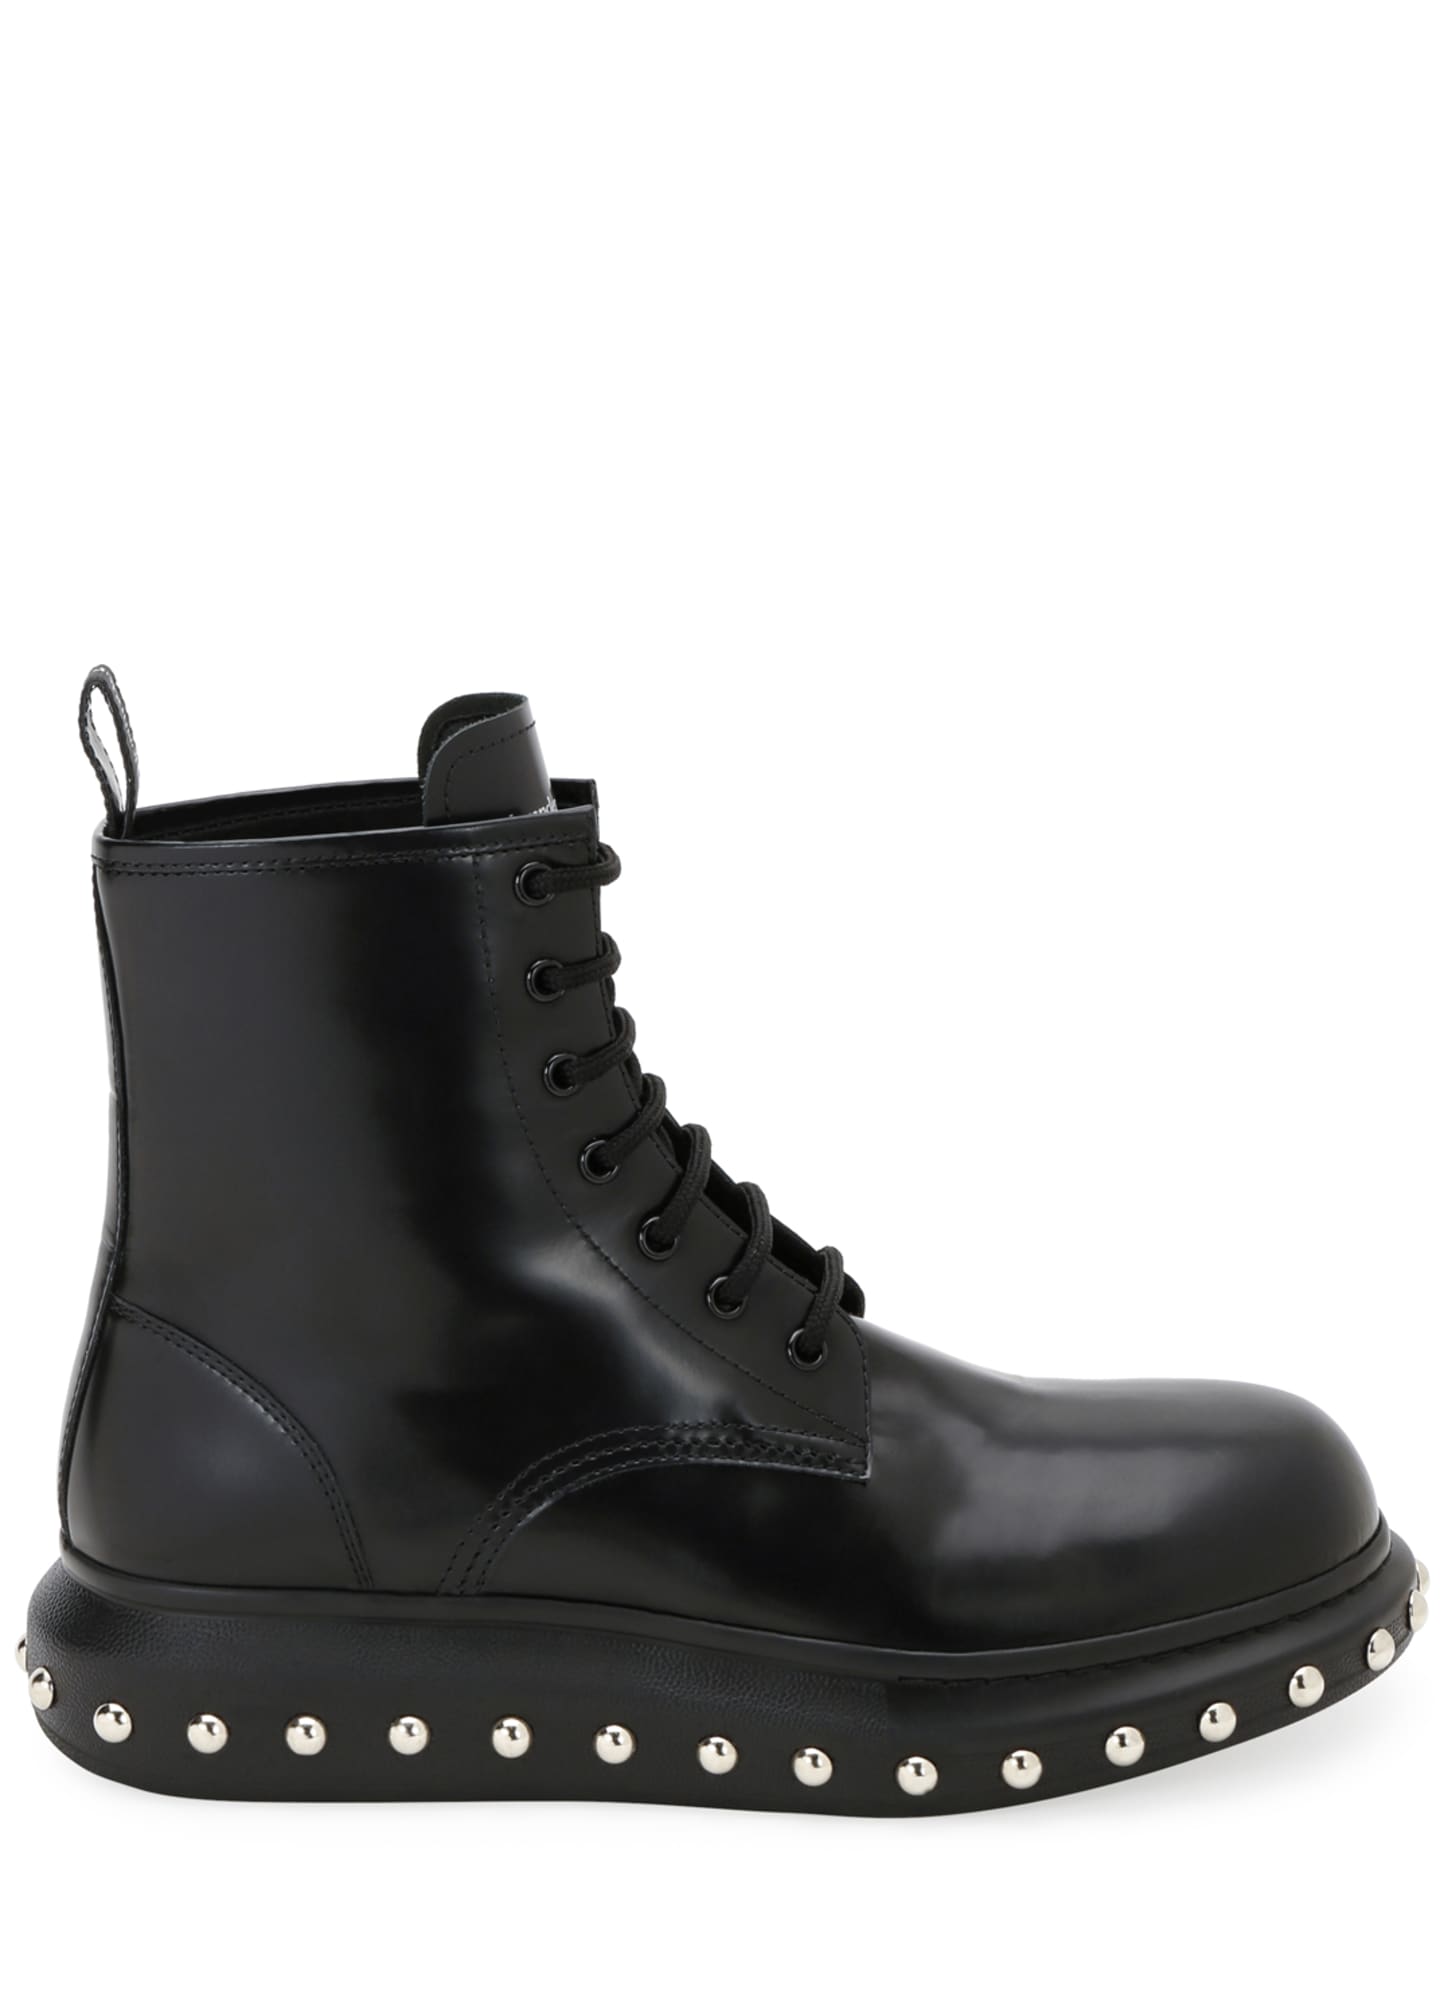 Alexander McQueen Men's Hybrid Lace-Up Boots w/ Studded Sole - Bergdorf ...